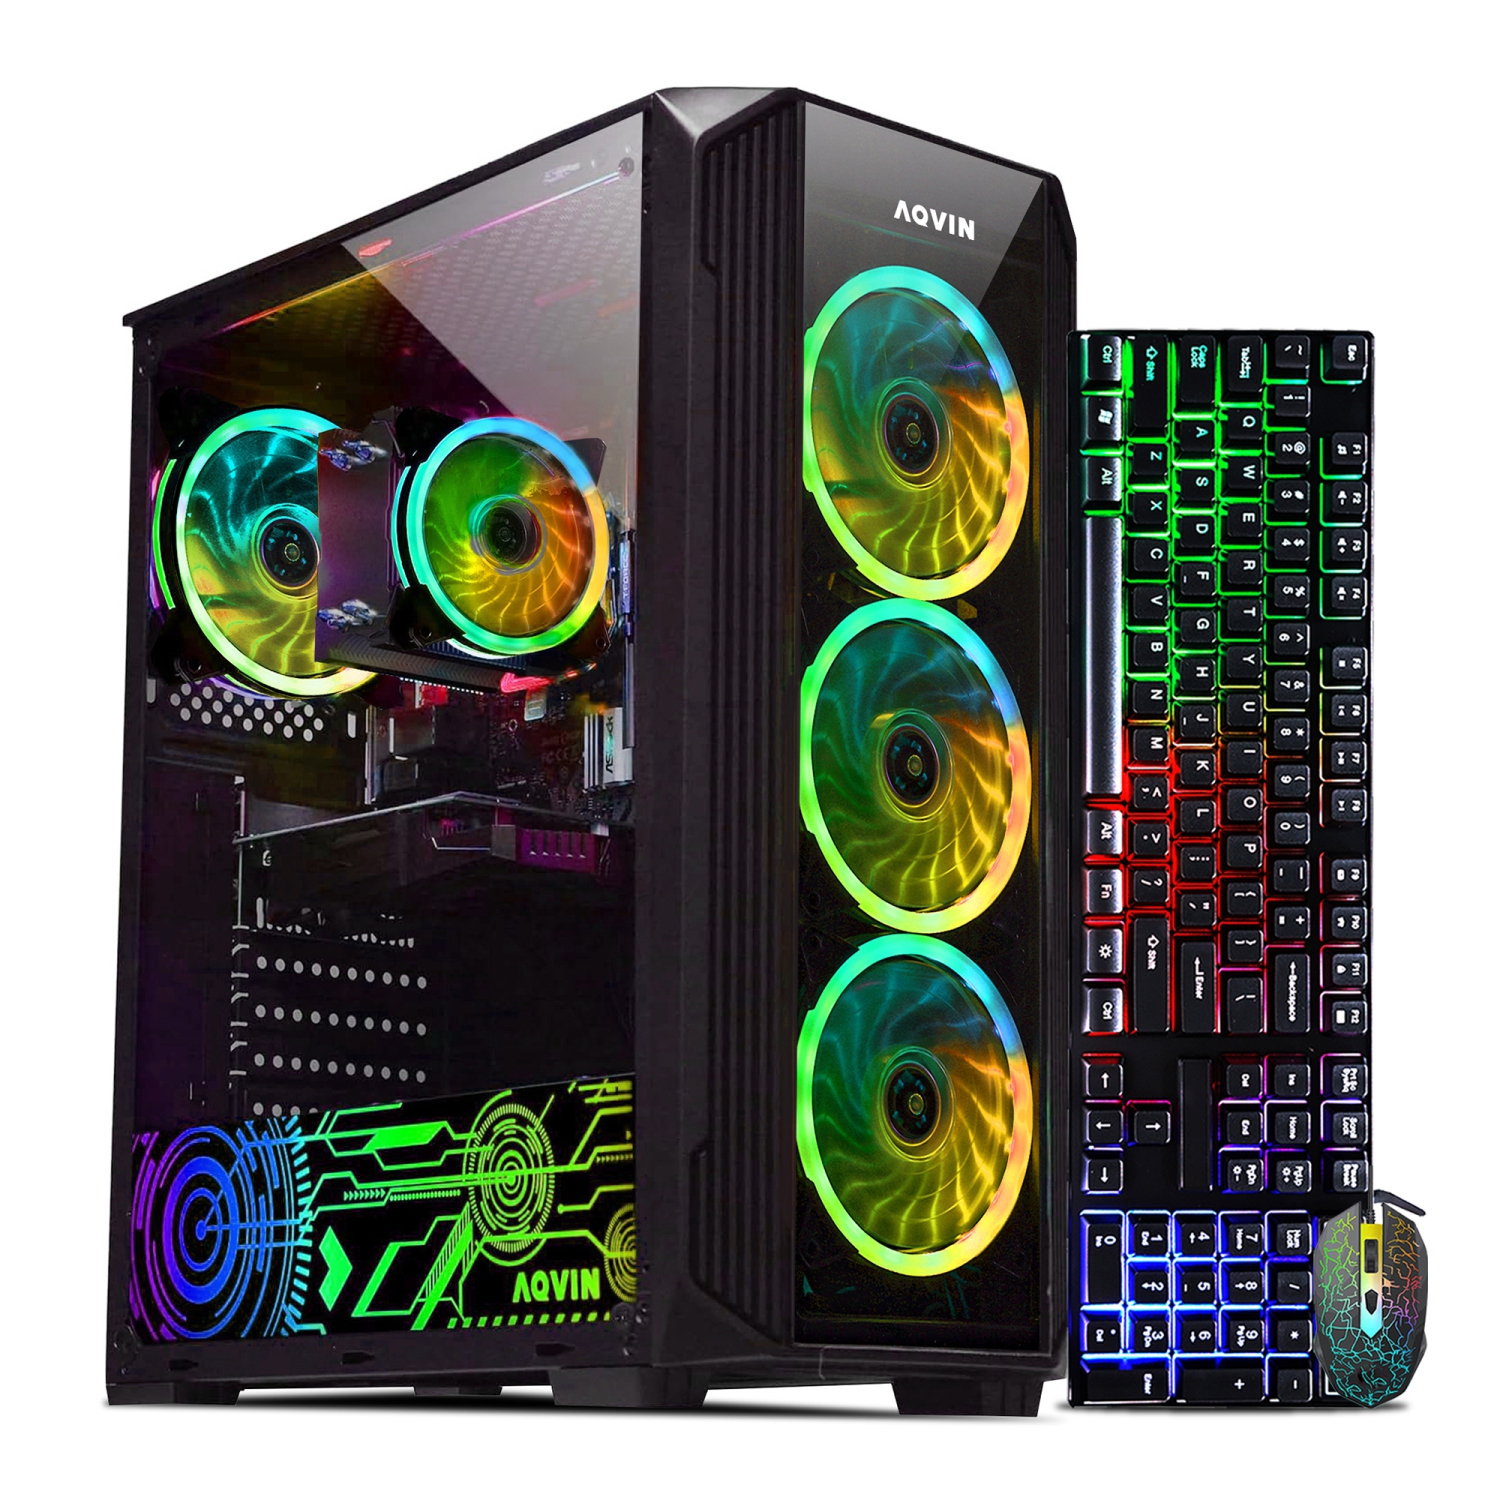 Gaming PC AQVIN Desktop Computer Tower - Black, Intel Core i7 up to 4.0 GHz 512GB SSD 16GB DDR4 RAM, Radeon RX 580 8GB, Windows 10 Pro - Only at Best Buy